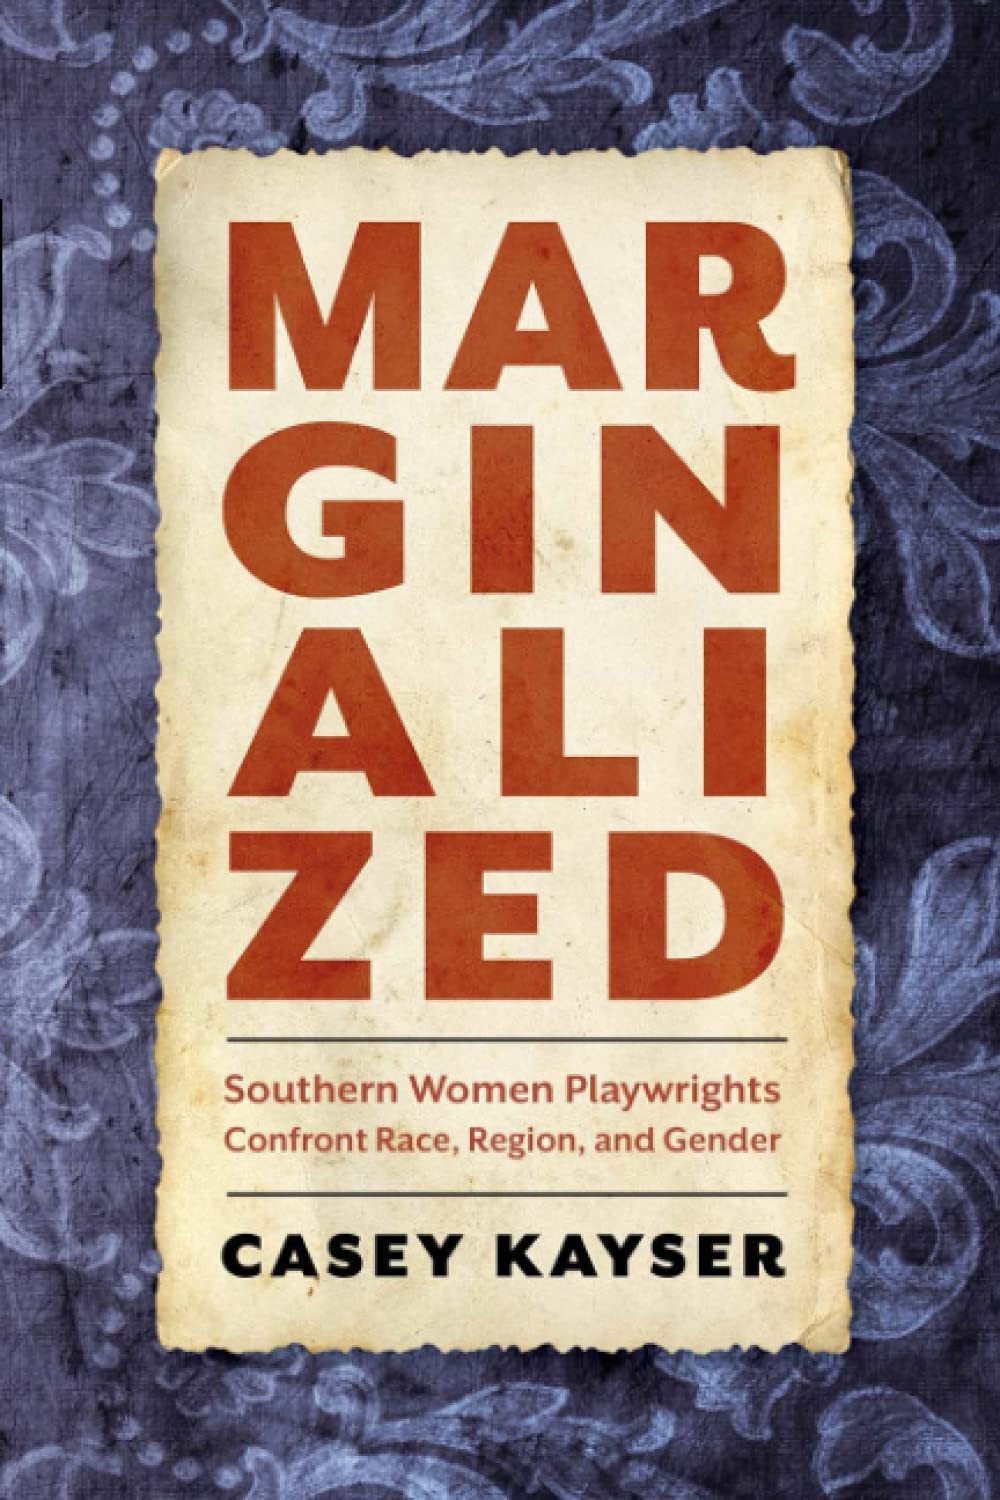 Marginalized: Southern Women Playwrights Confront Race, Region, and Gender (August 2021)